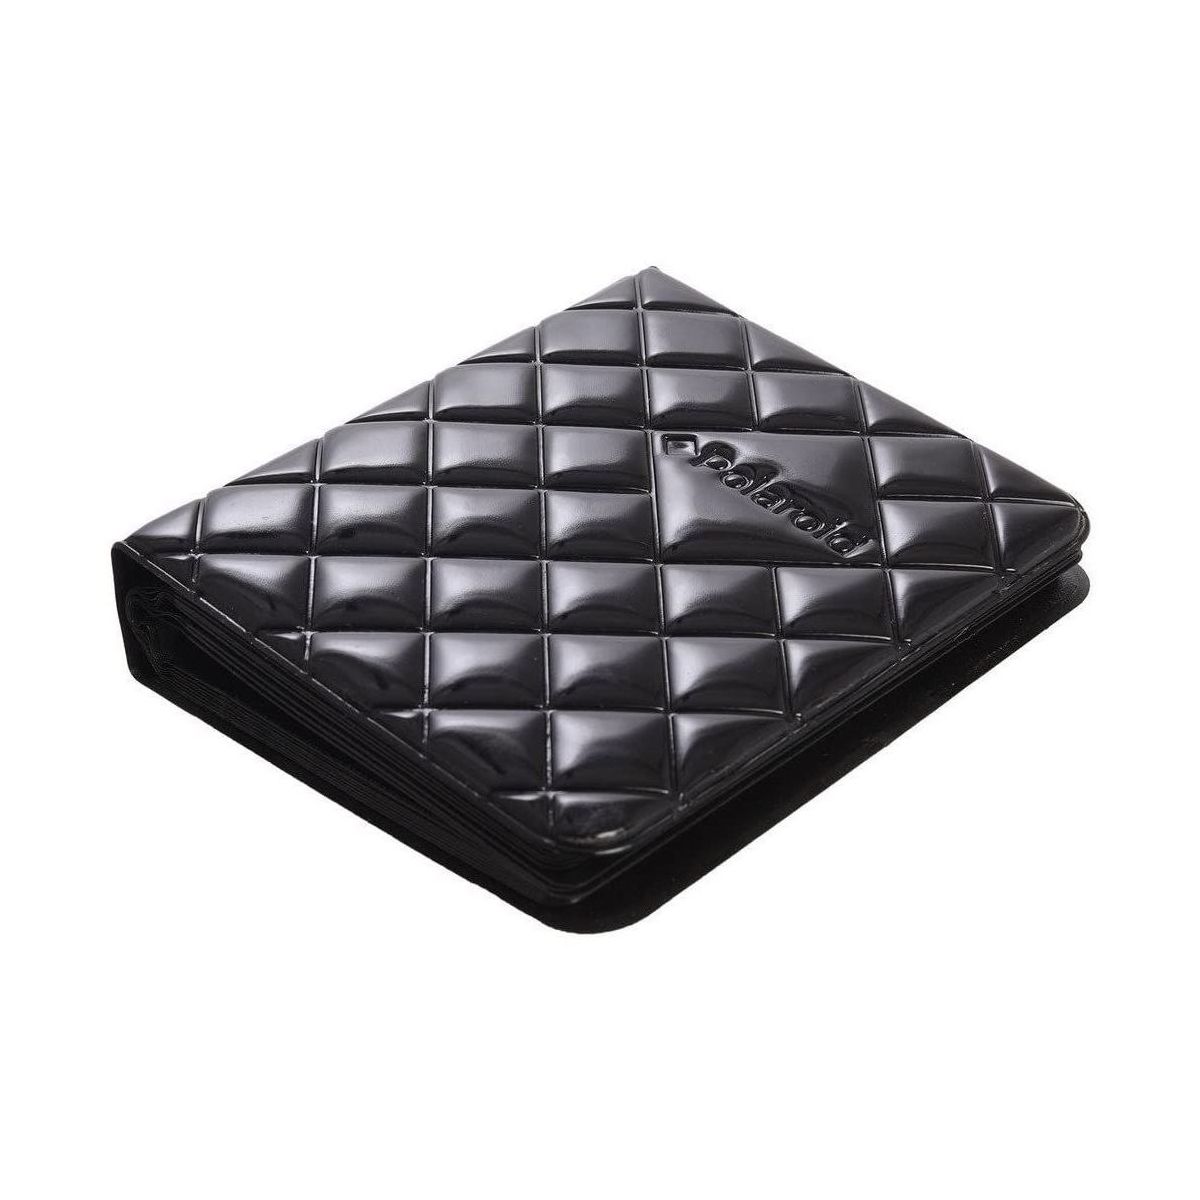 Polaroid Quilted Cover Photo Album Black for 2 x 3 inch Photos (Holds up to 64 Photos)